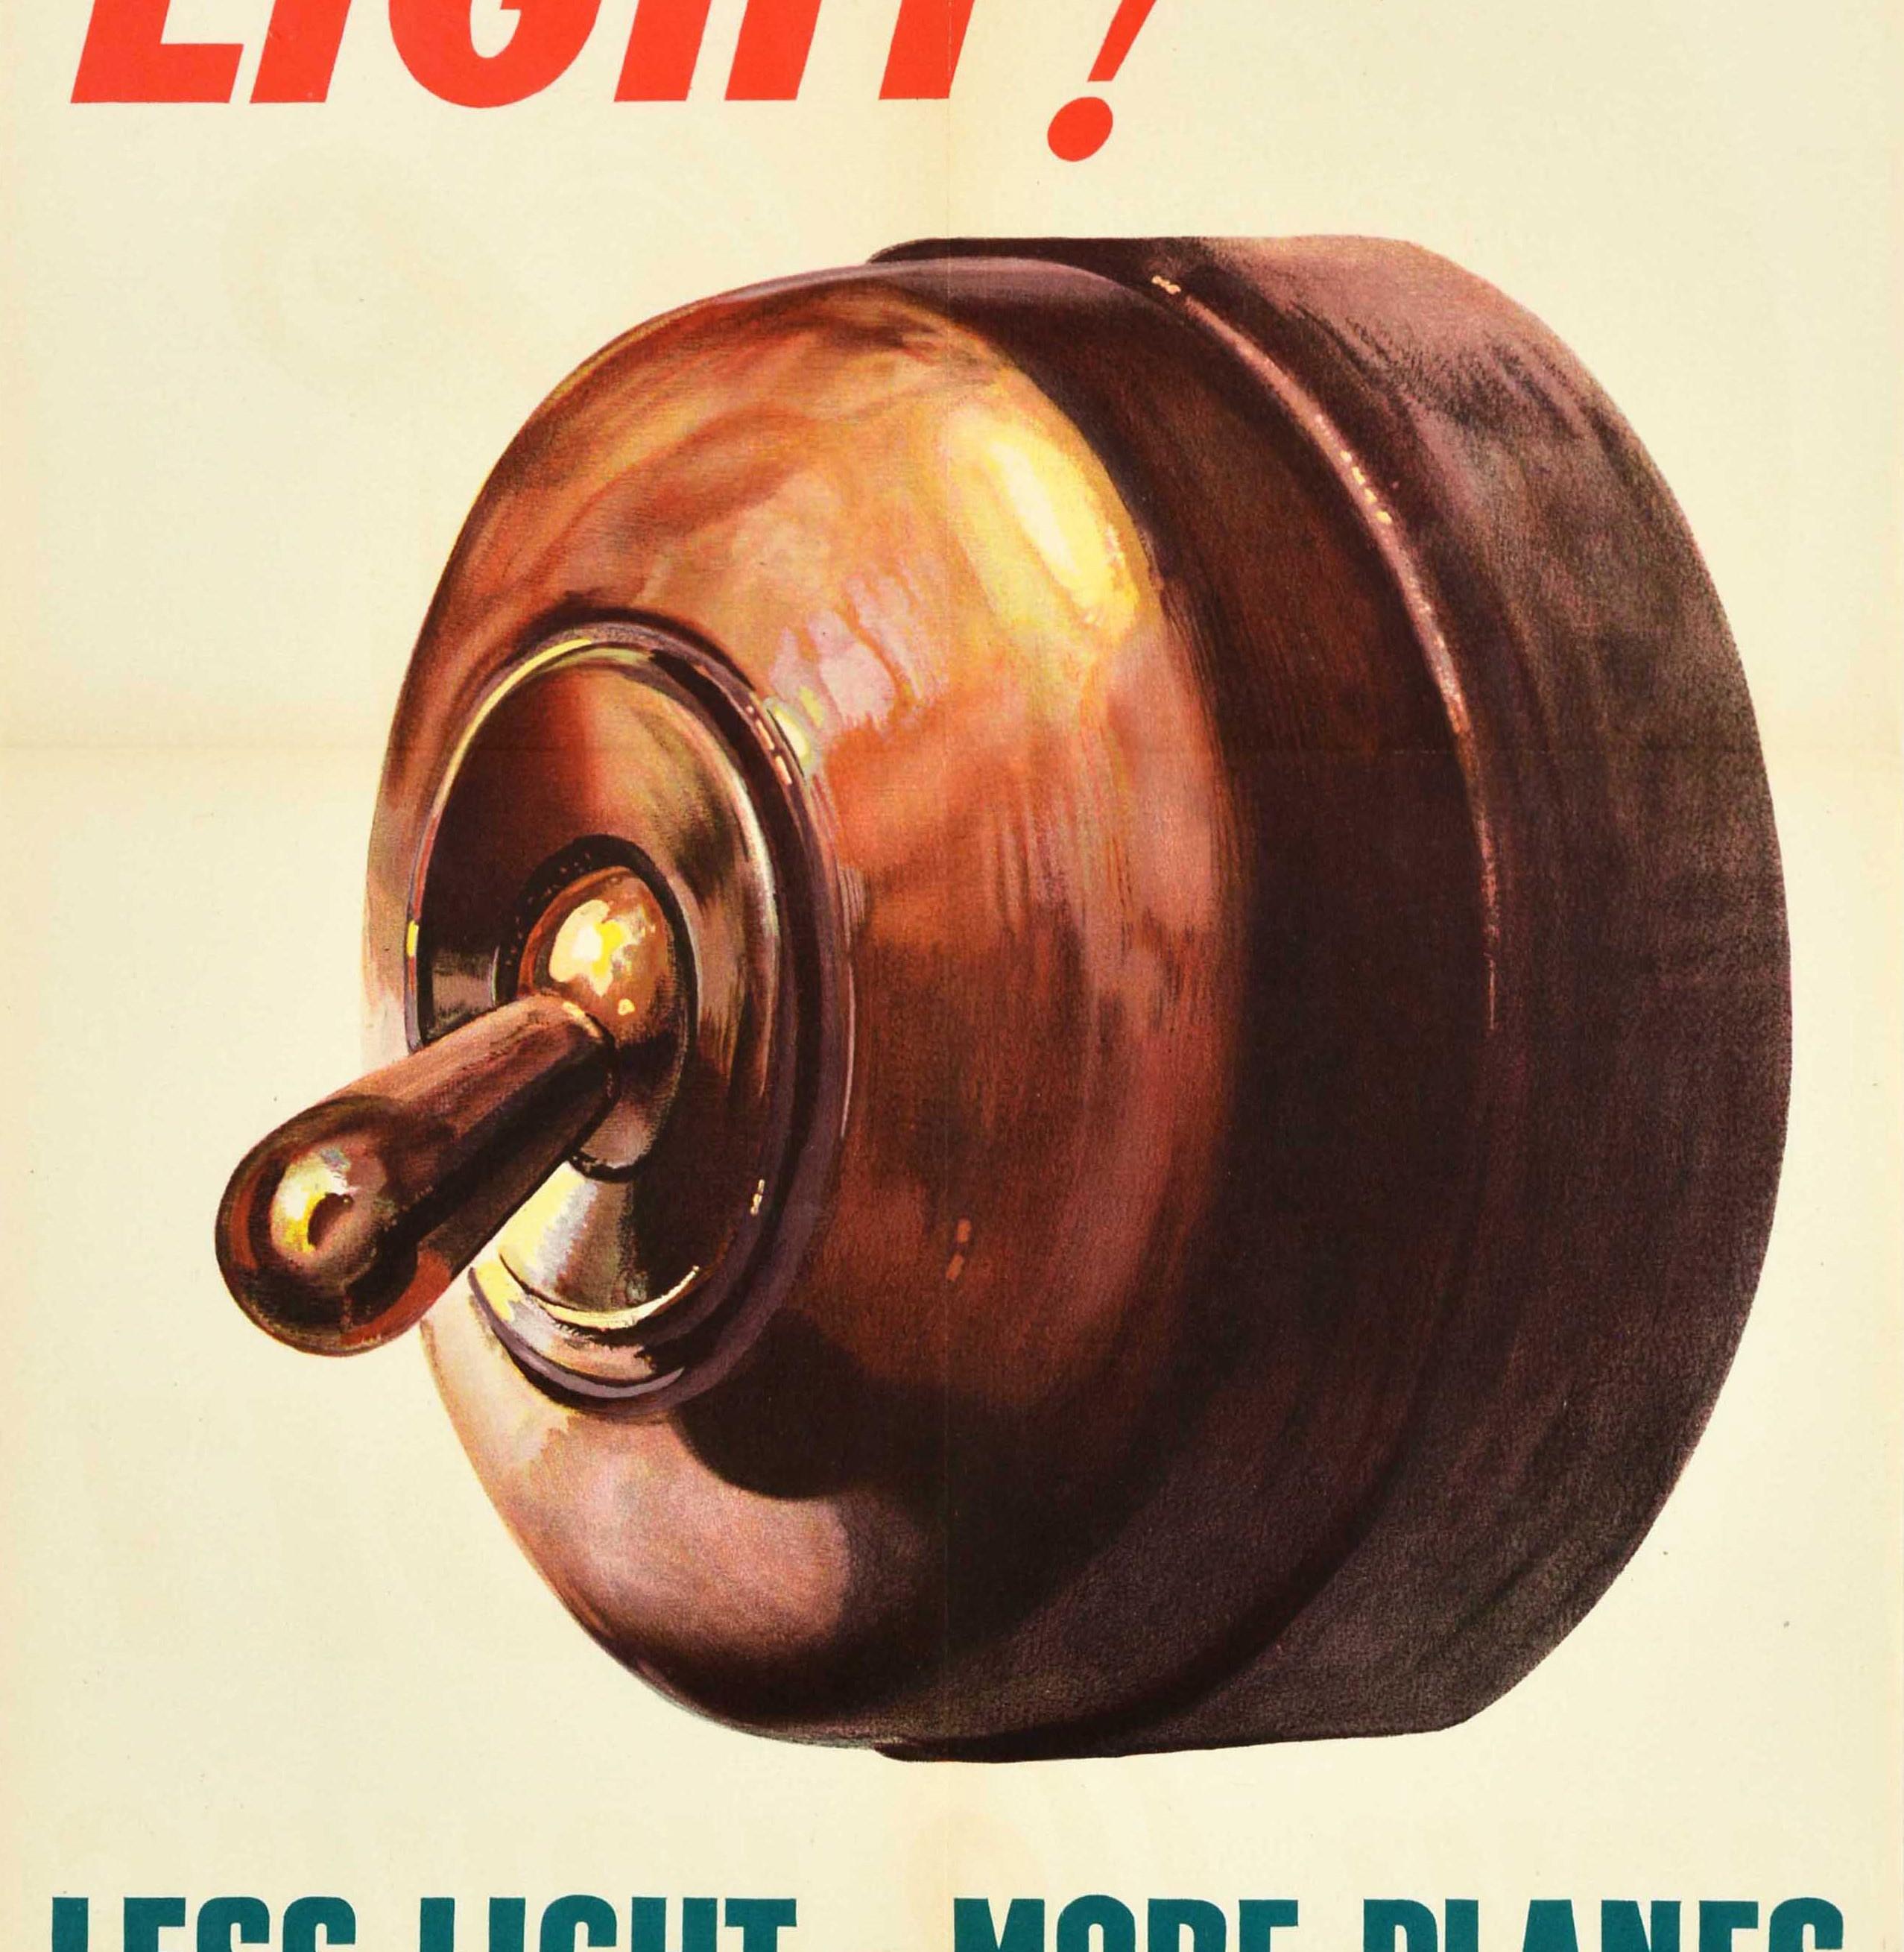 switch off lights poster